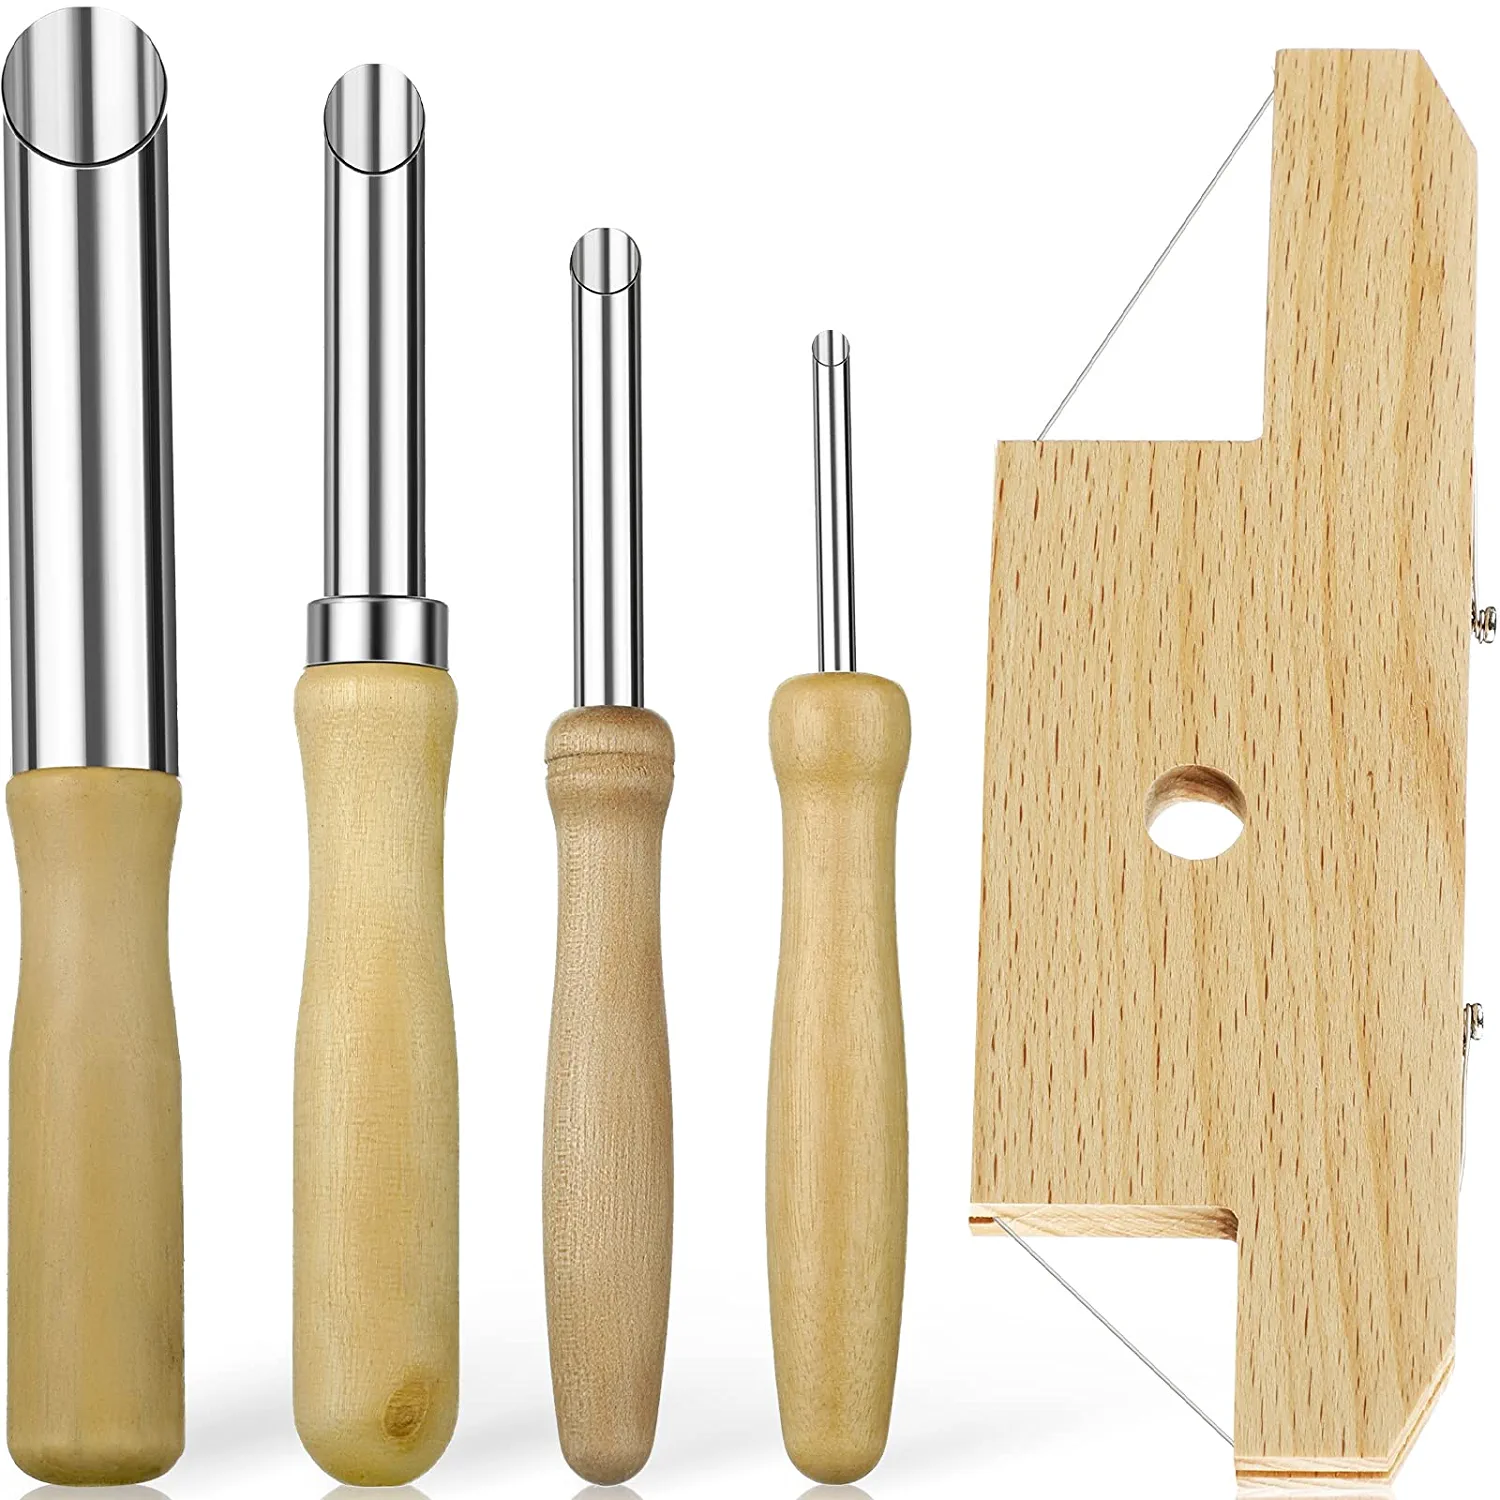 5 Pcs Pottery Clay Tools Set Includes Wood And Wire Bevel Cutter And 4 Pcs Circu - £16.01 GBP